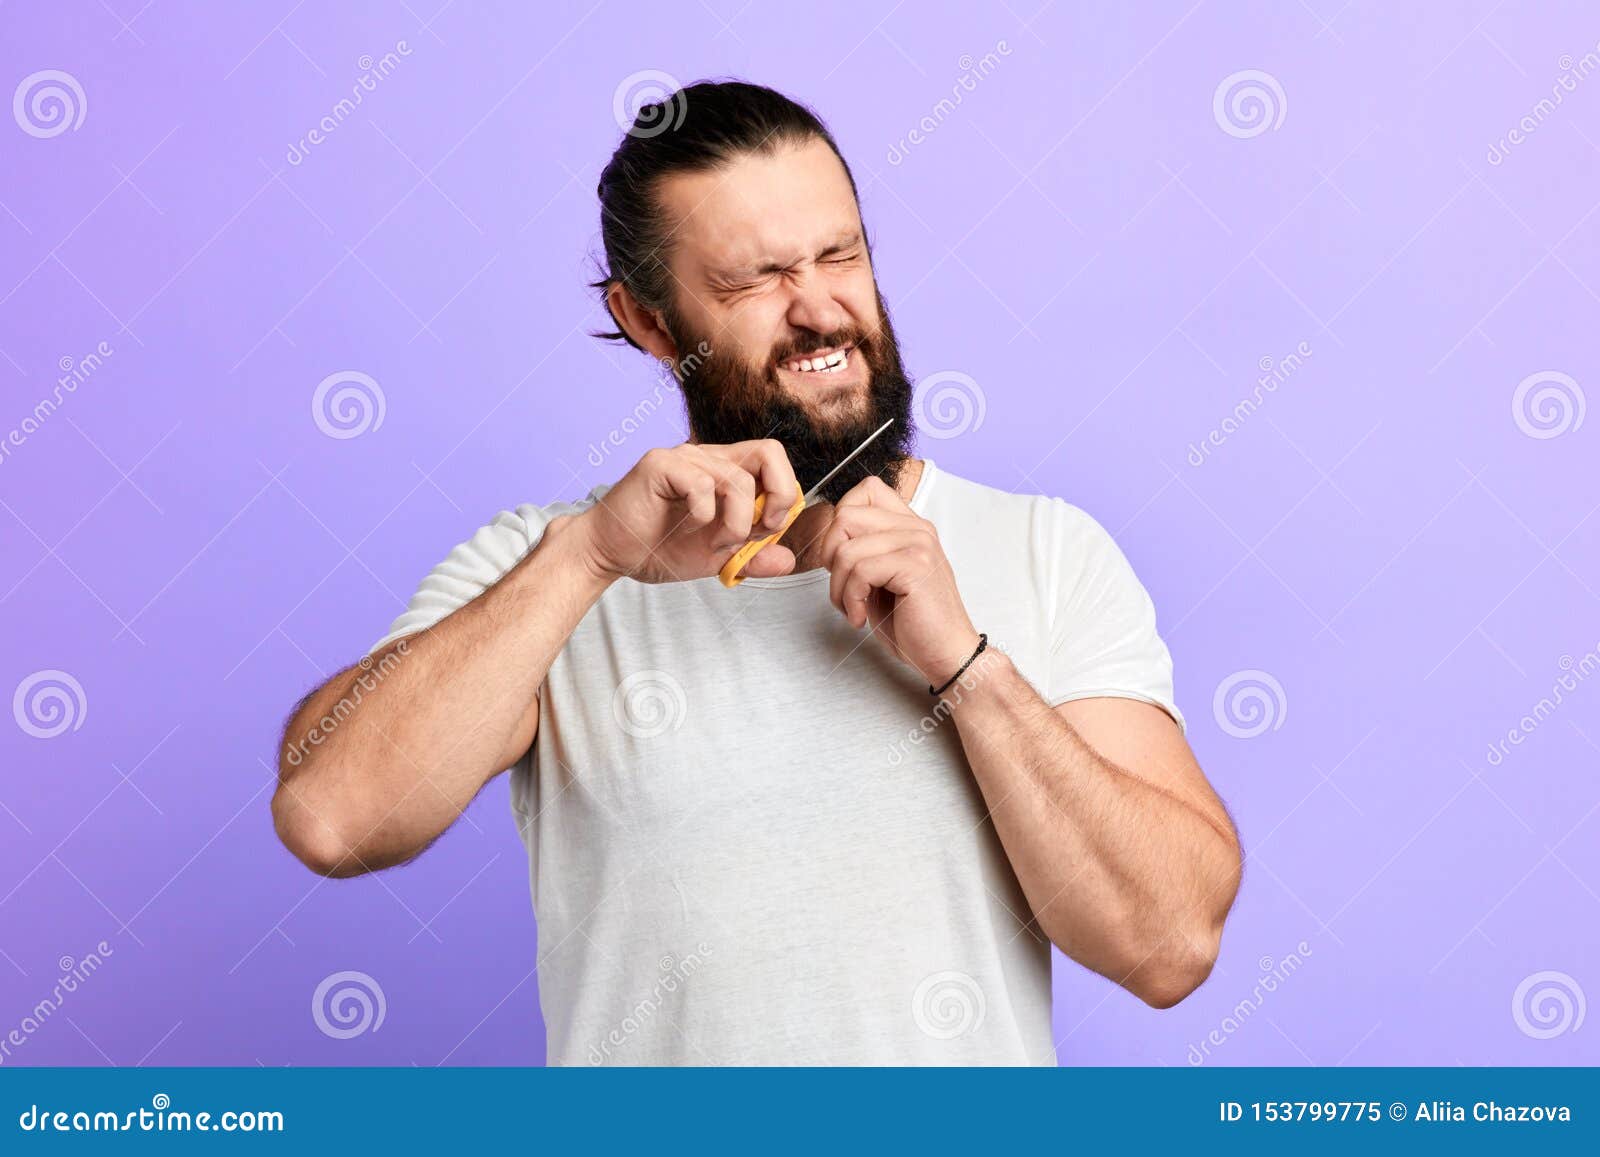 Angry Crazy Funny Man Hates His Beard Stock Image - Image of ears,  handsome: 153799775